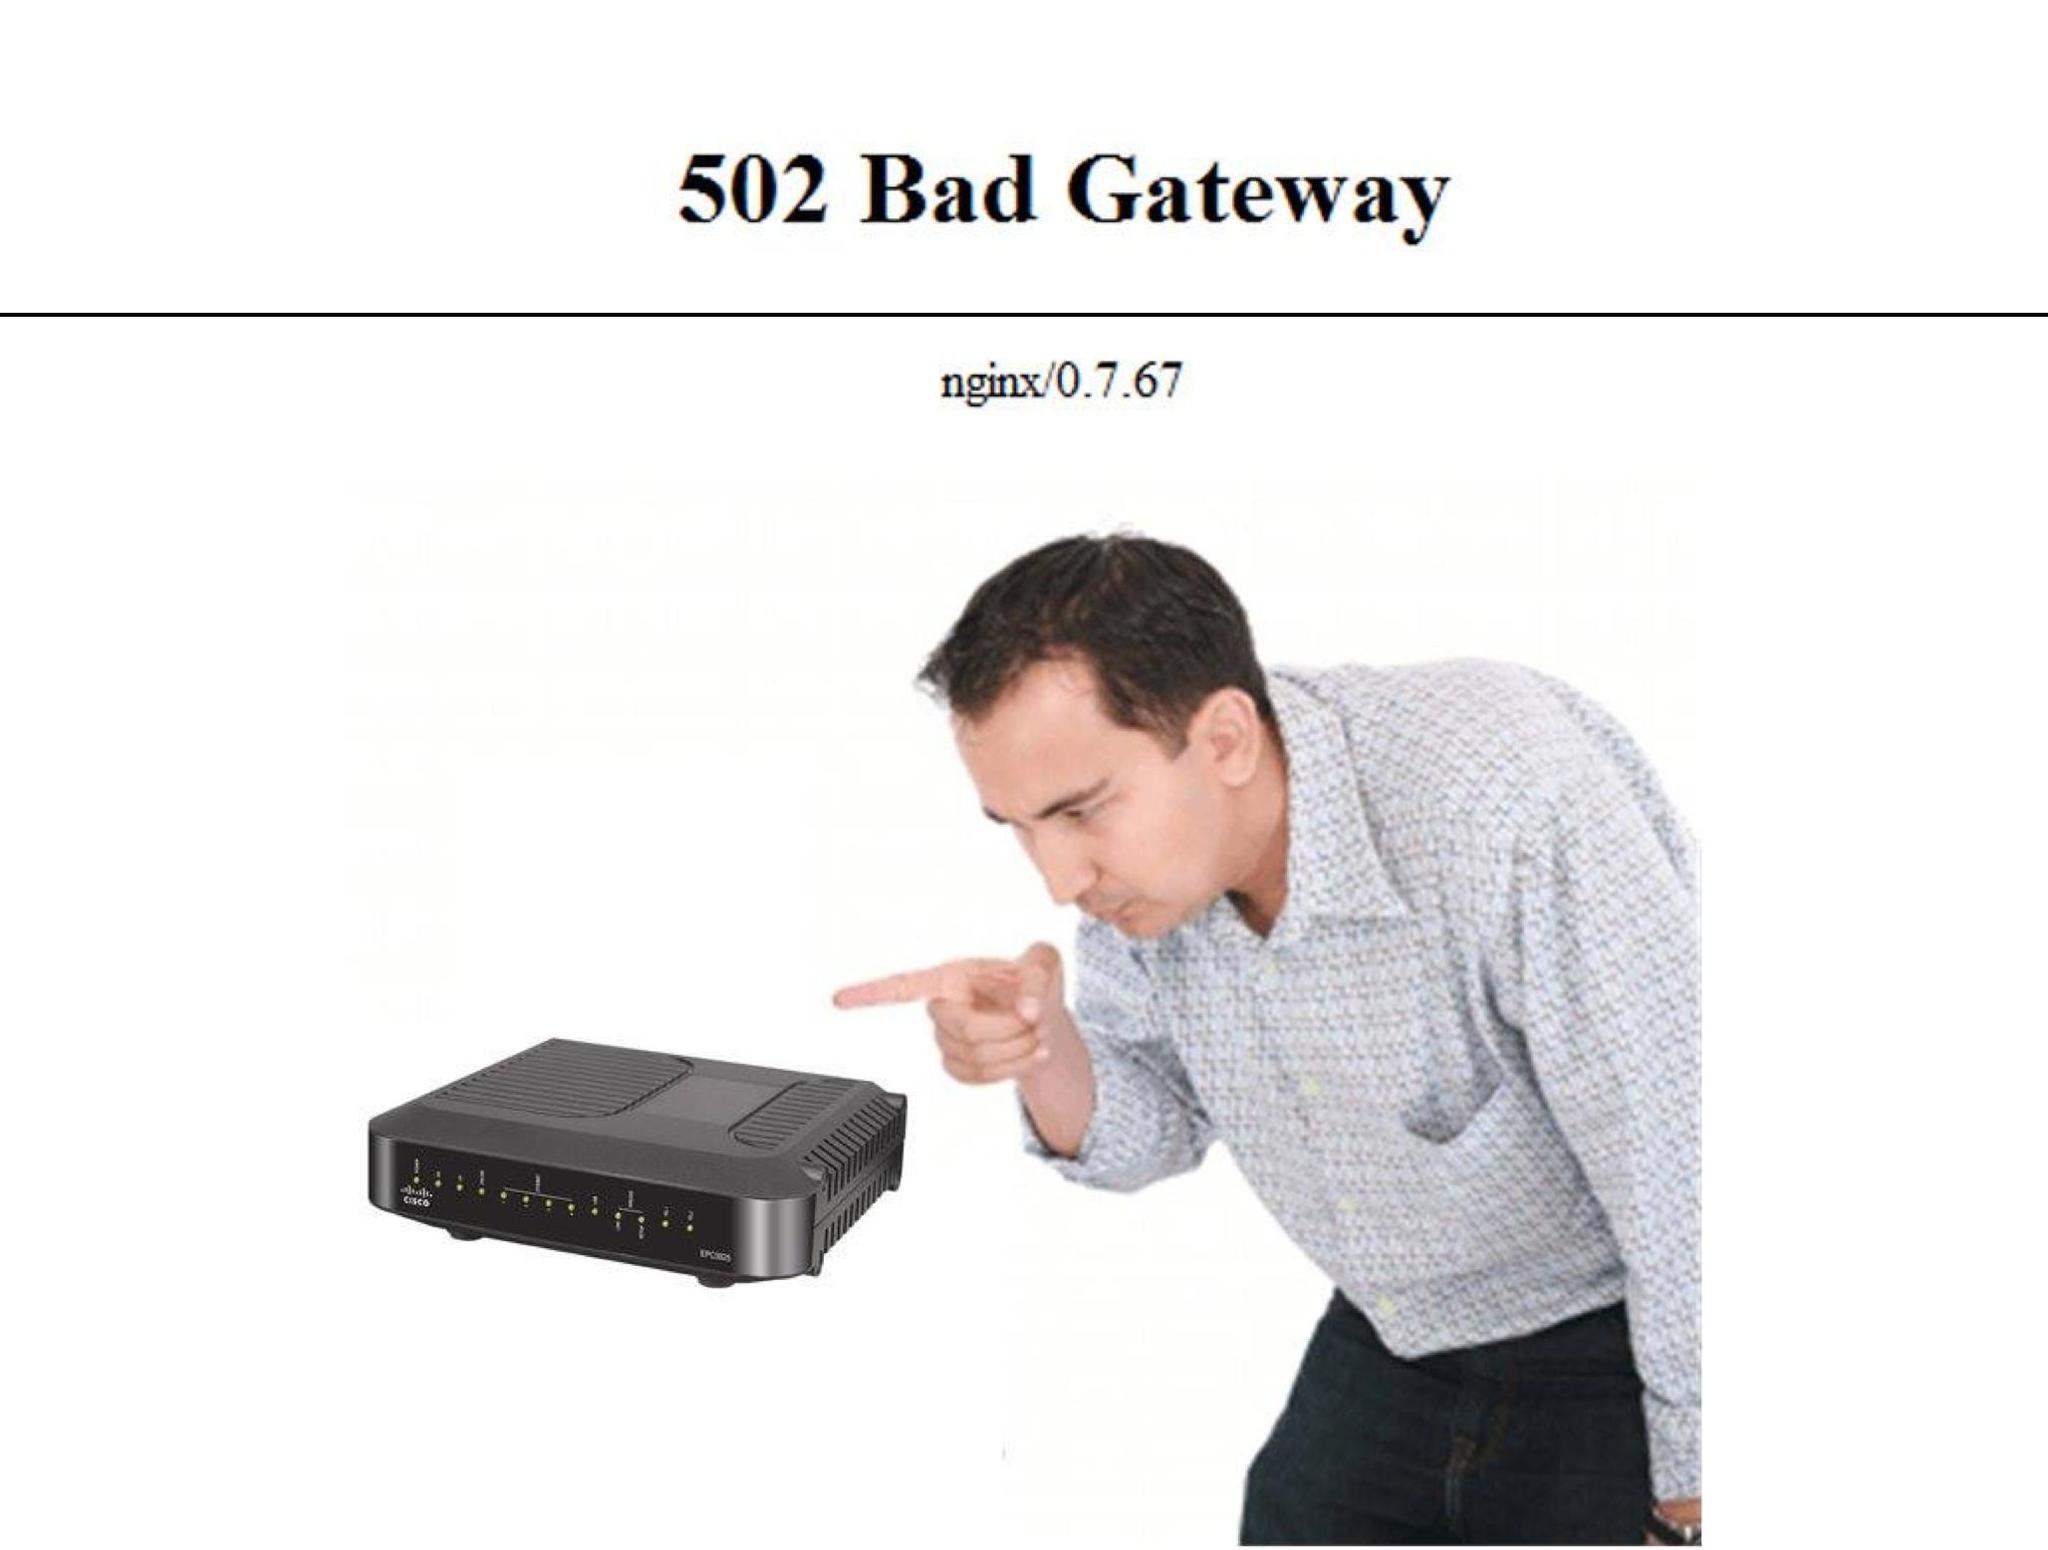 A picture of the nginx "502 Bad Gateway" error message with a man scolding a router